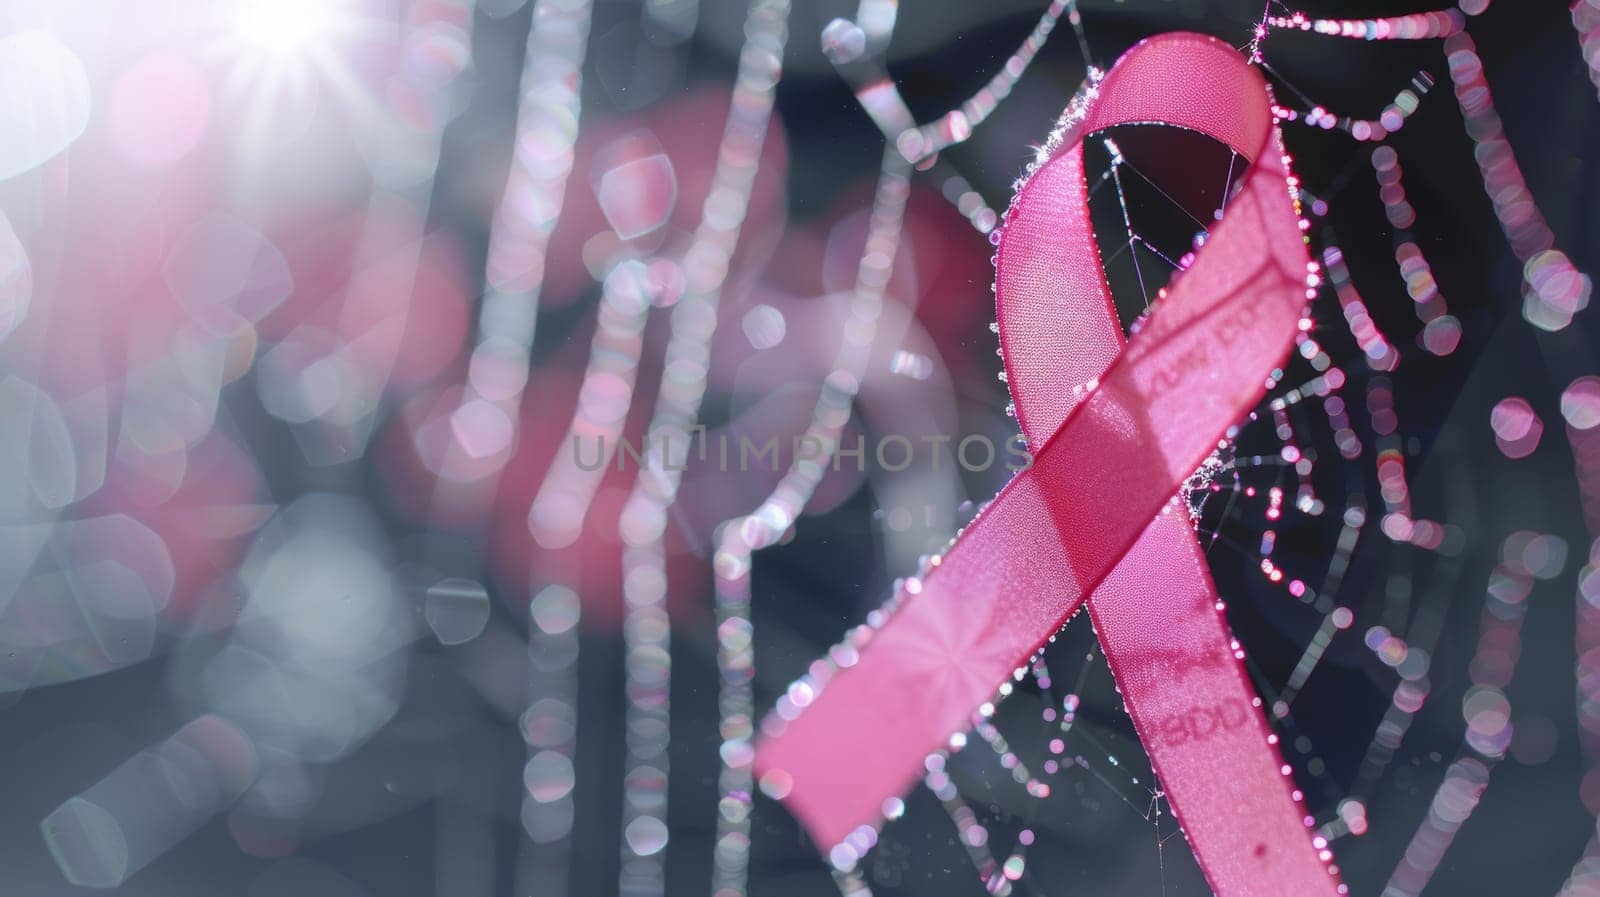 Pink Ribbon Breast Cancer Awareness Symbol with Cobwebs and Water Droplets. Hope and Courage in the Face of Struggle by ailike